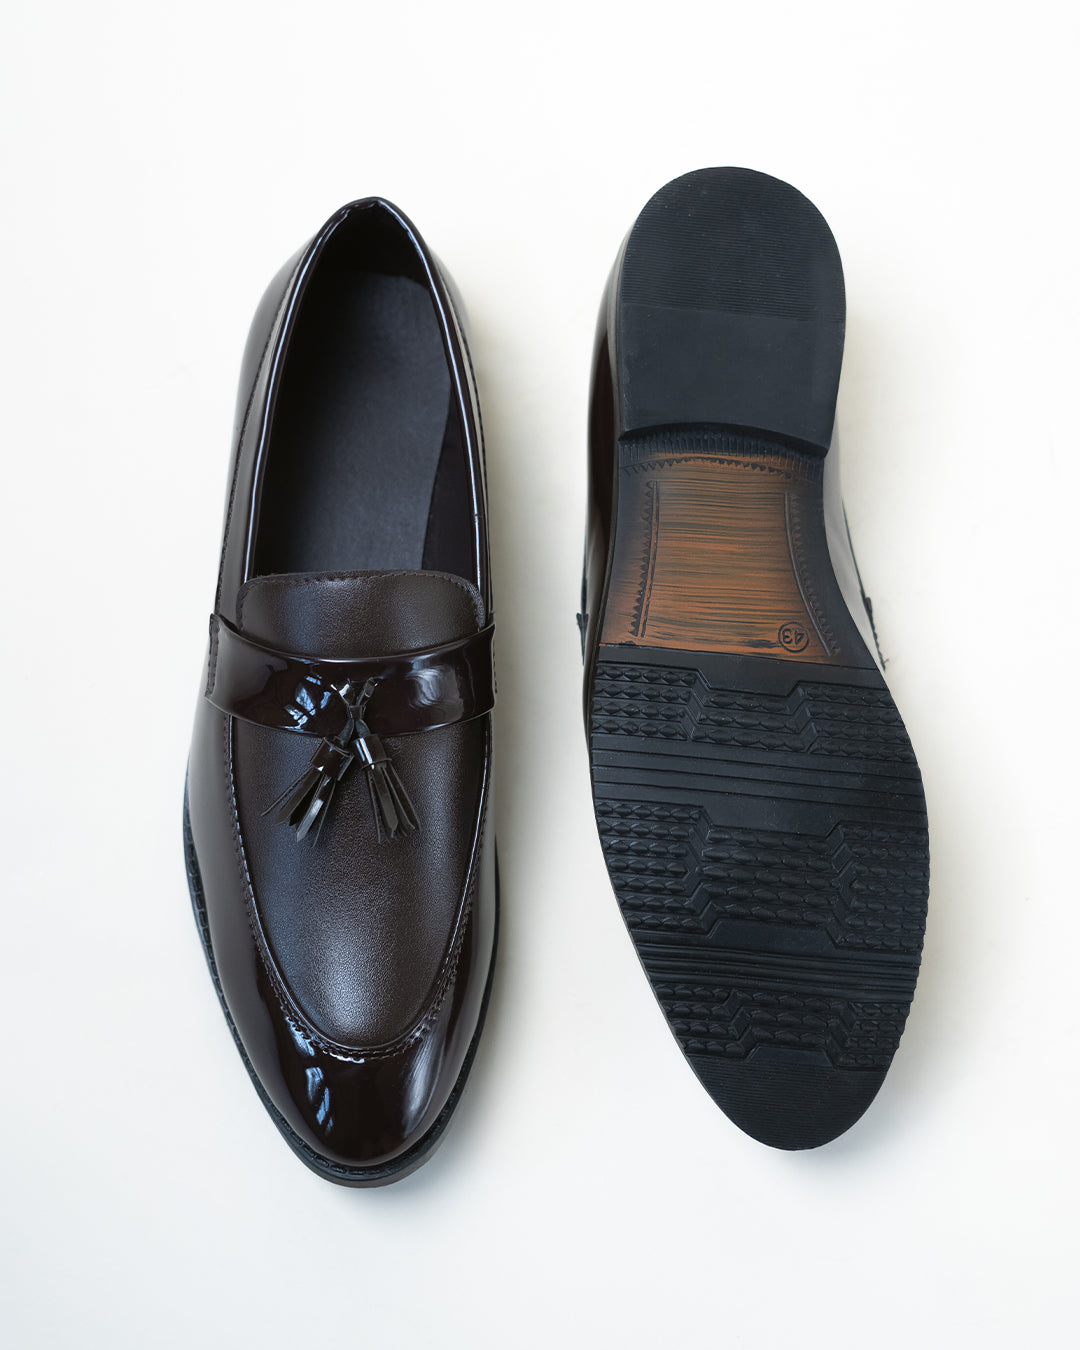 Aesthetic Men's Casual Loafers | Littlebox India